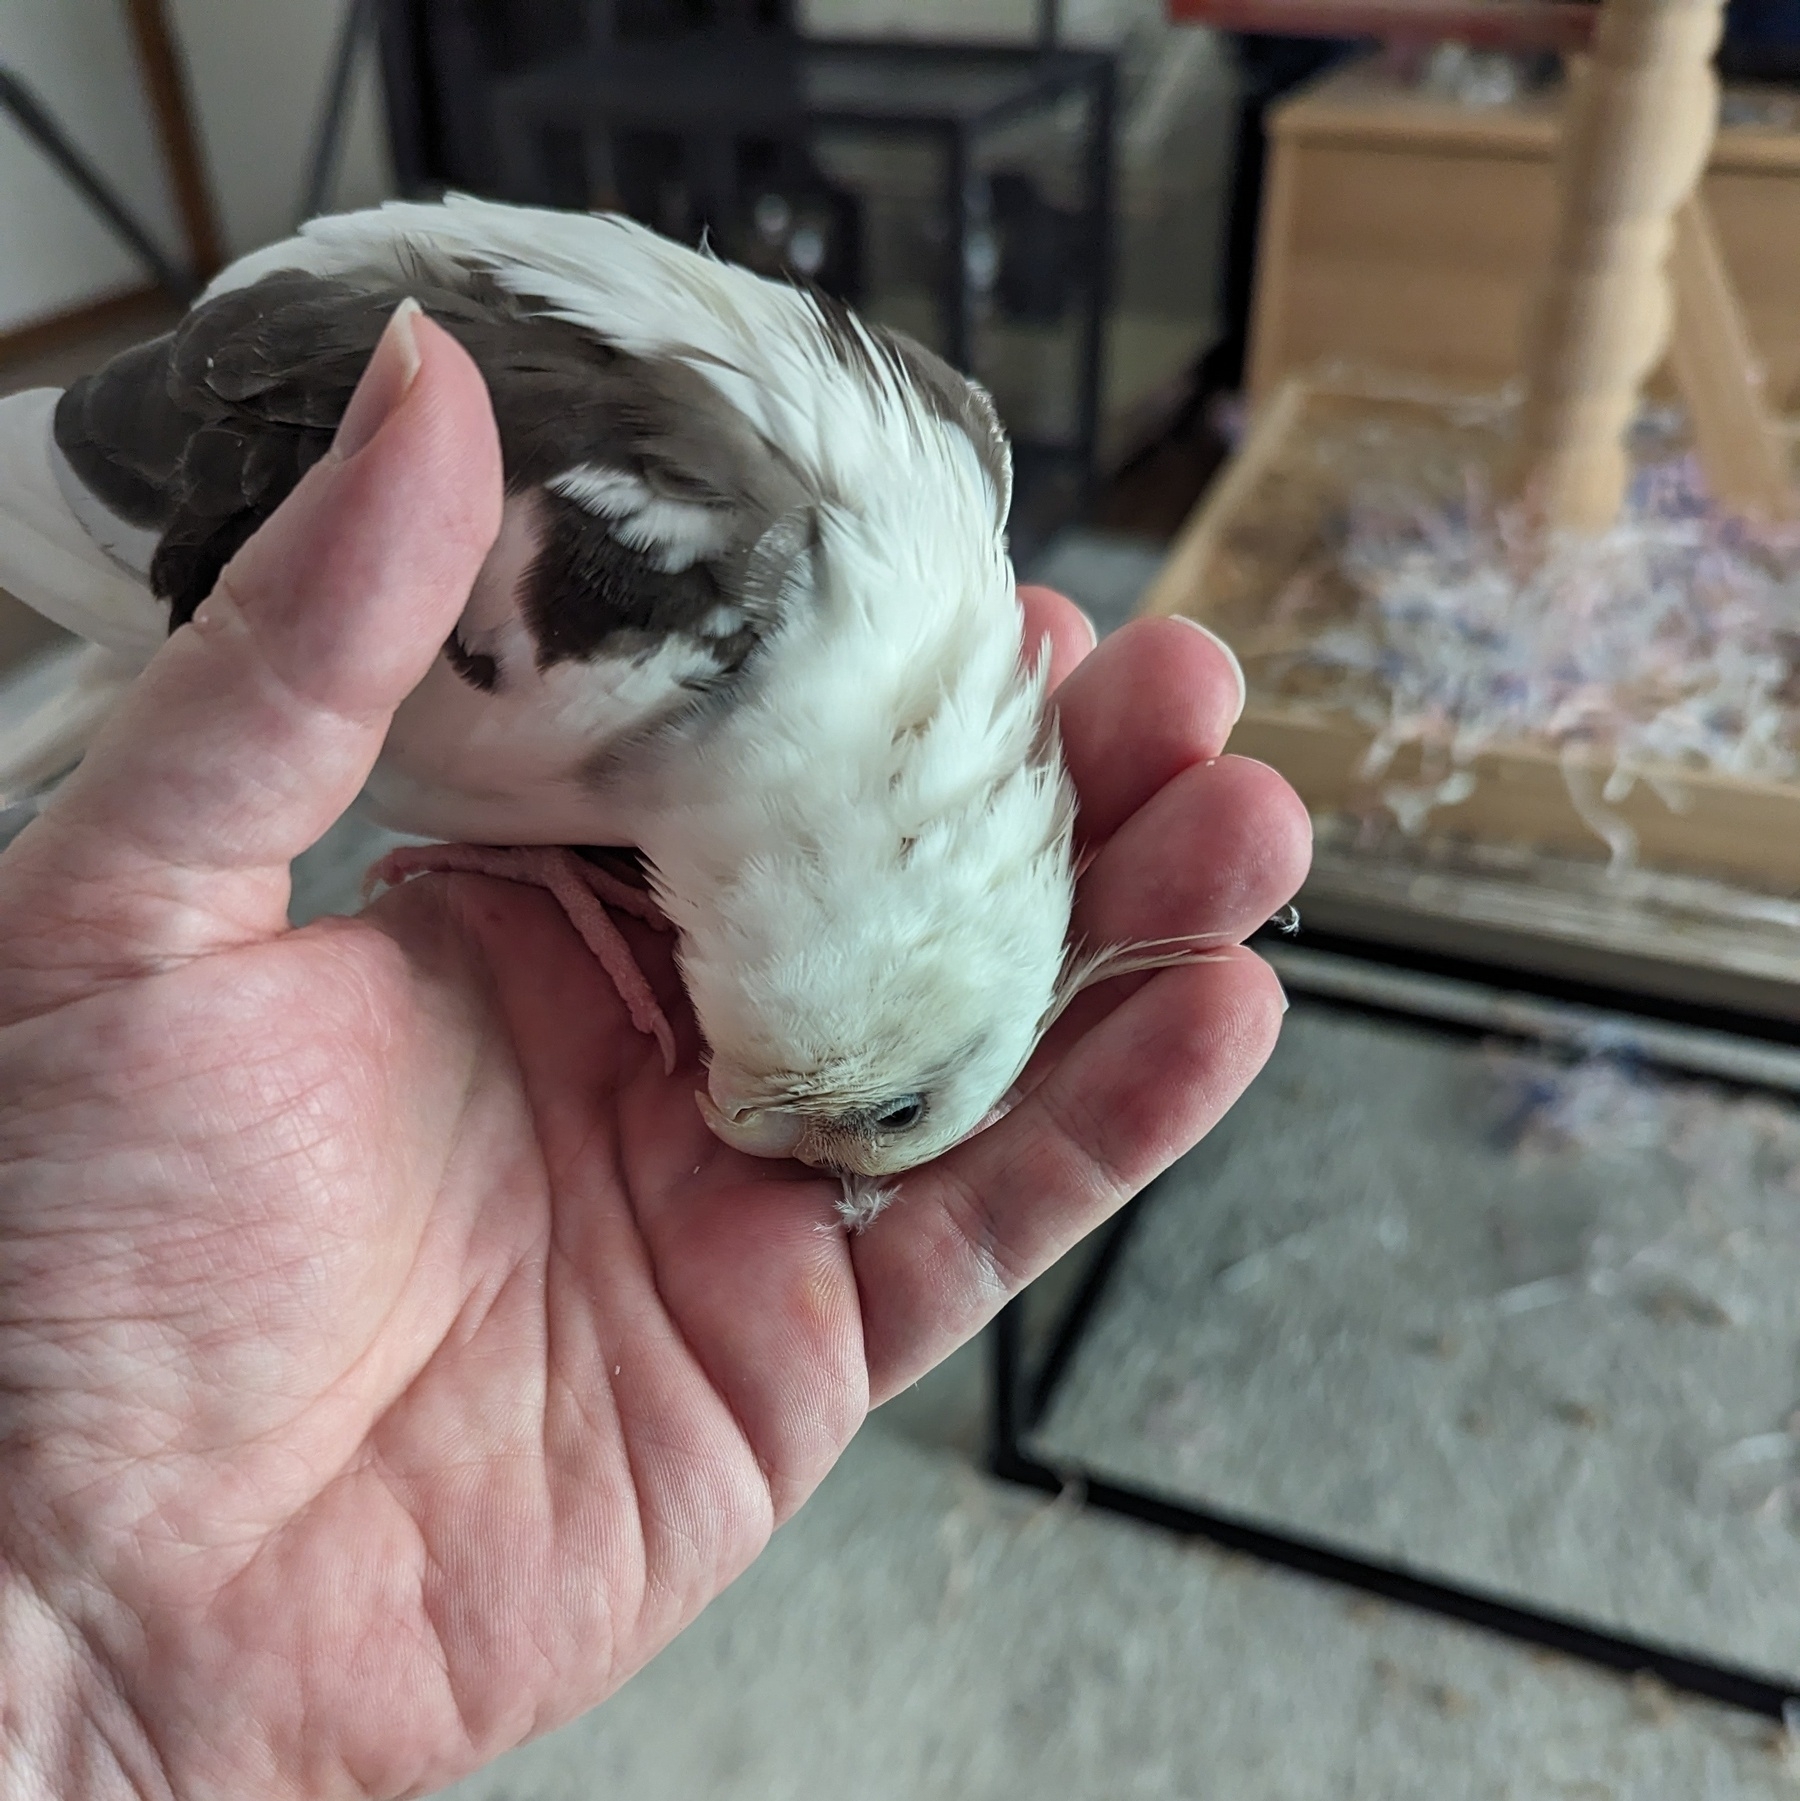 A while cockatiel on an open palm with her head resting on the fingers. The photos taken within a room.